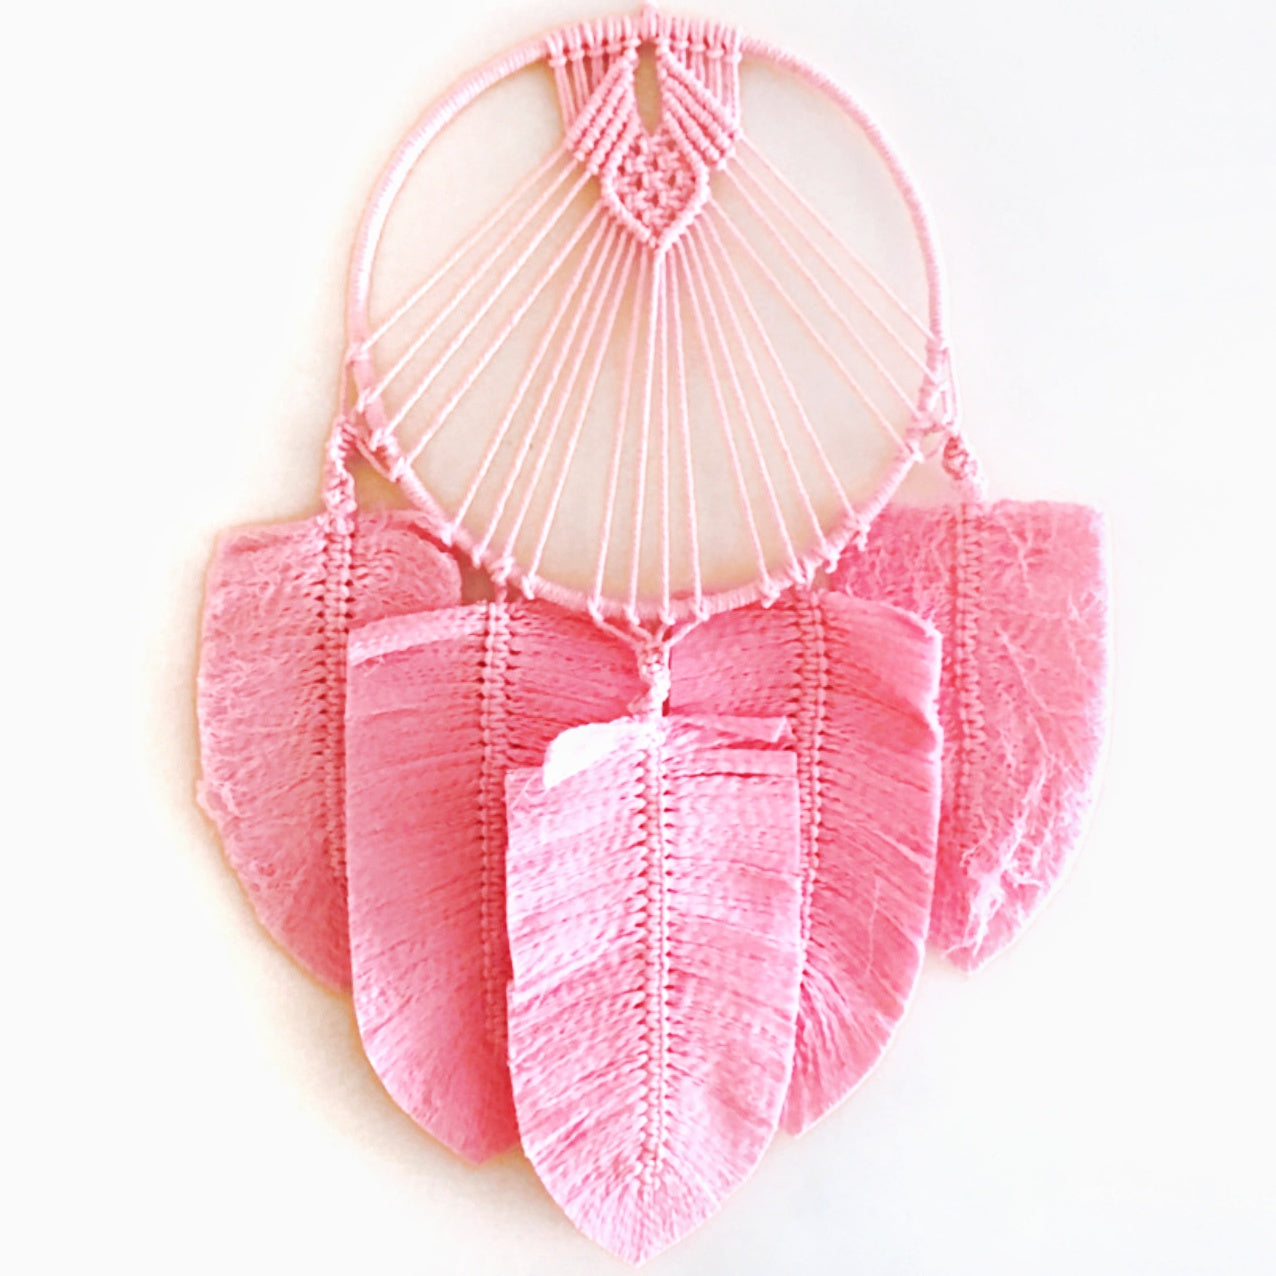 5 Leaf Macrame Dreamcatcher with Beads Soft Pink